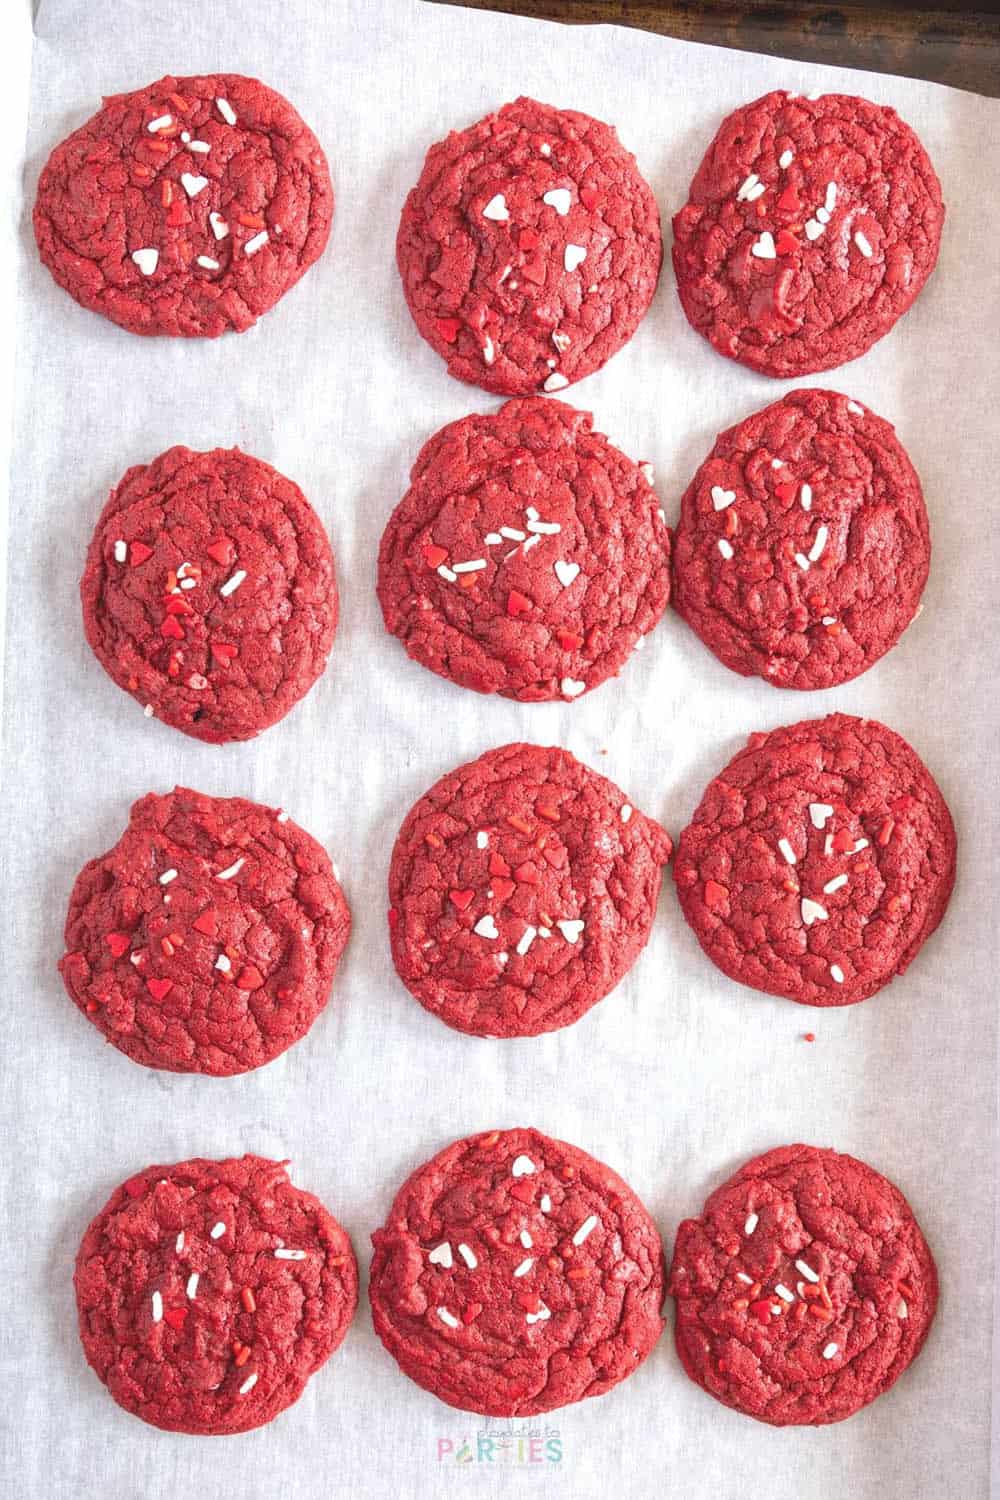 Red velvet cake mix cookies on a pan after baking.